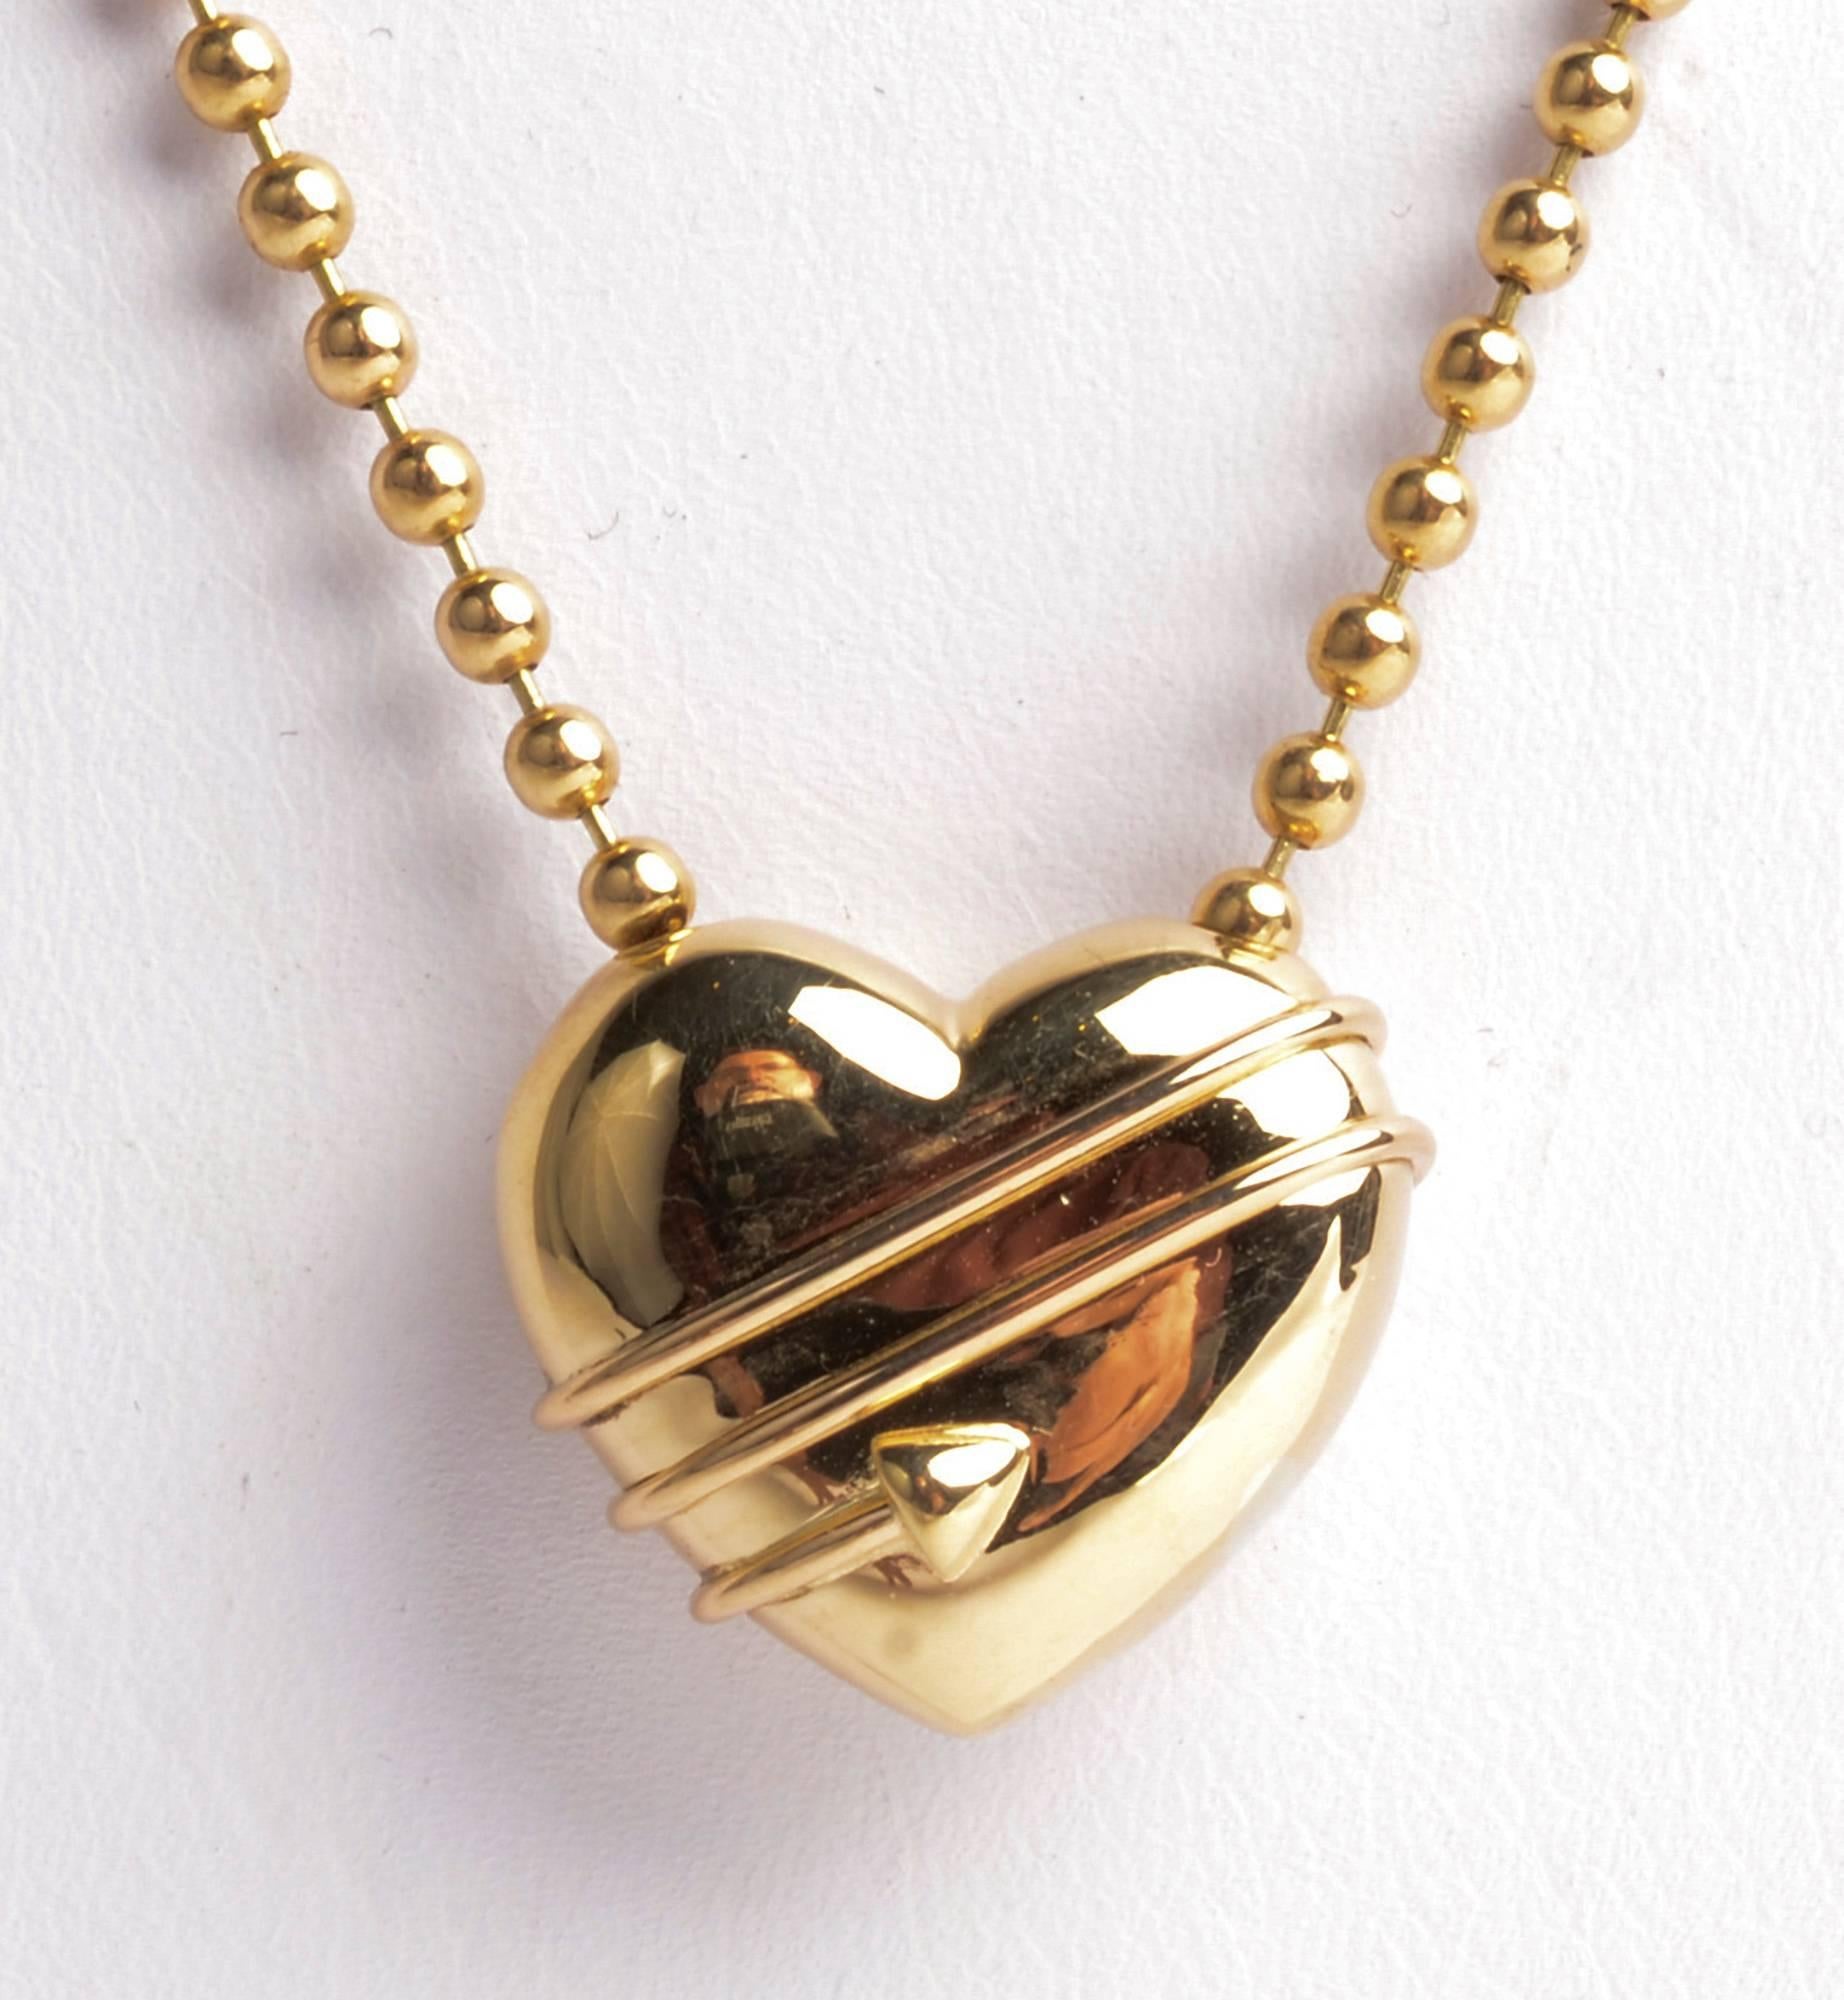 Eighteen karat gold heart pendant necklace by Tiffany. An arrow is wrapped three times around the heart. The pendant is on a Tiffany bead chain measuring 17 inches long.